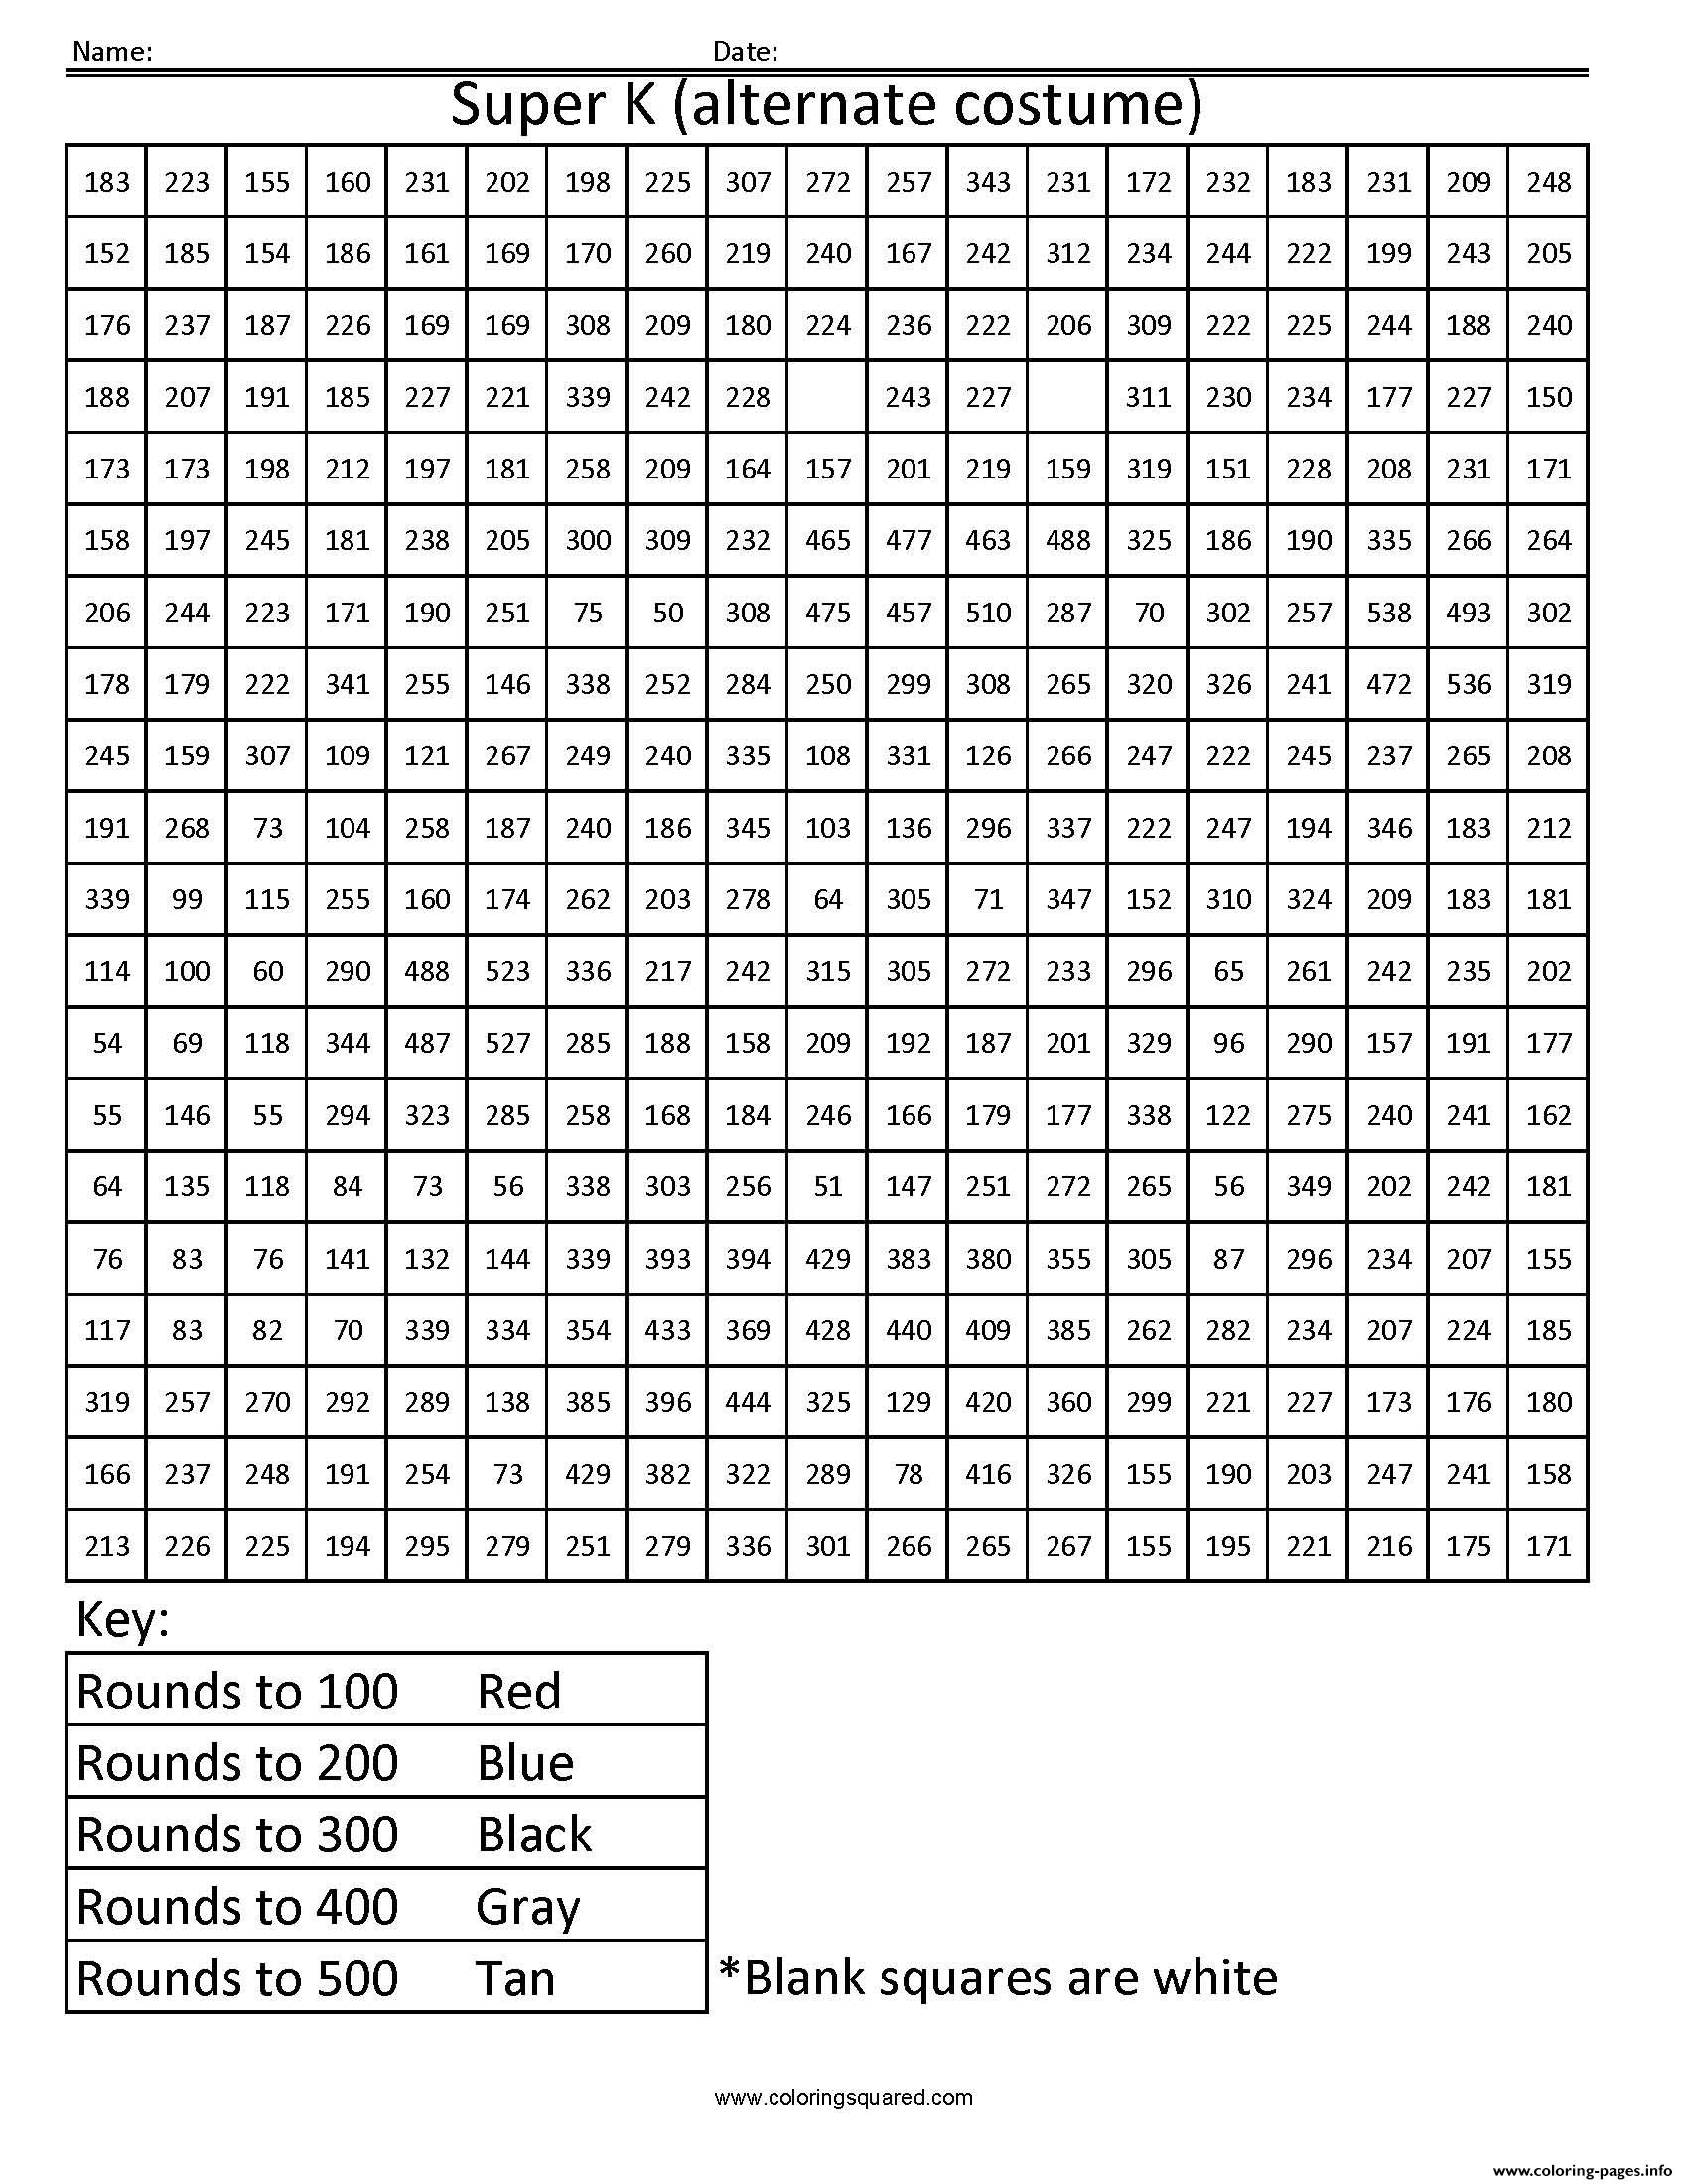 Rounding Worksheets Super K 2 Free Math Pixel Art Coloring Effy Moom Free Coloring Picture wallpaper give a chance to color on the wall without getting in trouble! Fill the walls of your home or office with stress-relieving [effymoom.blogspot.com]